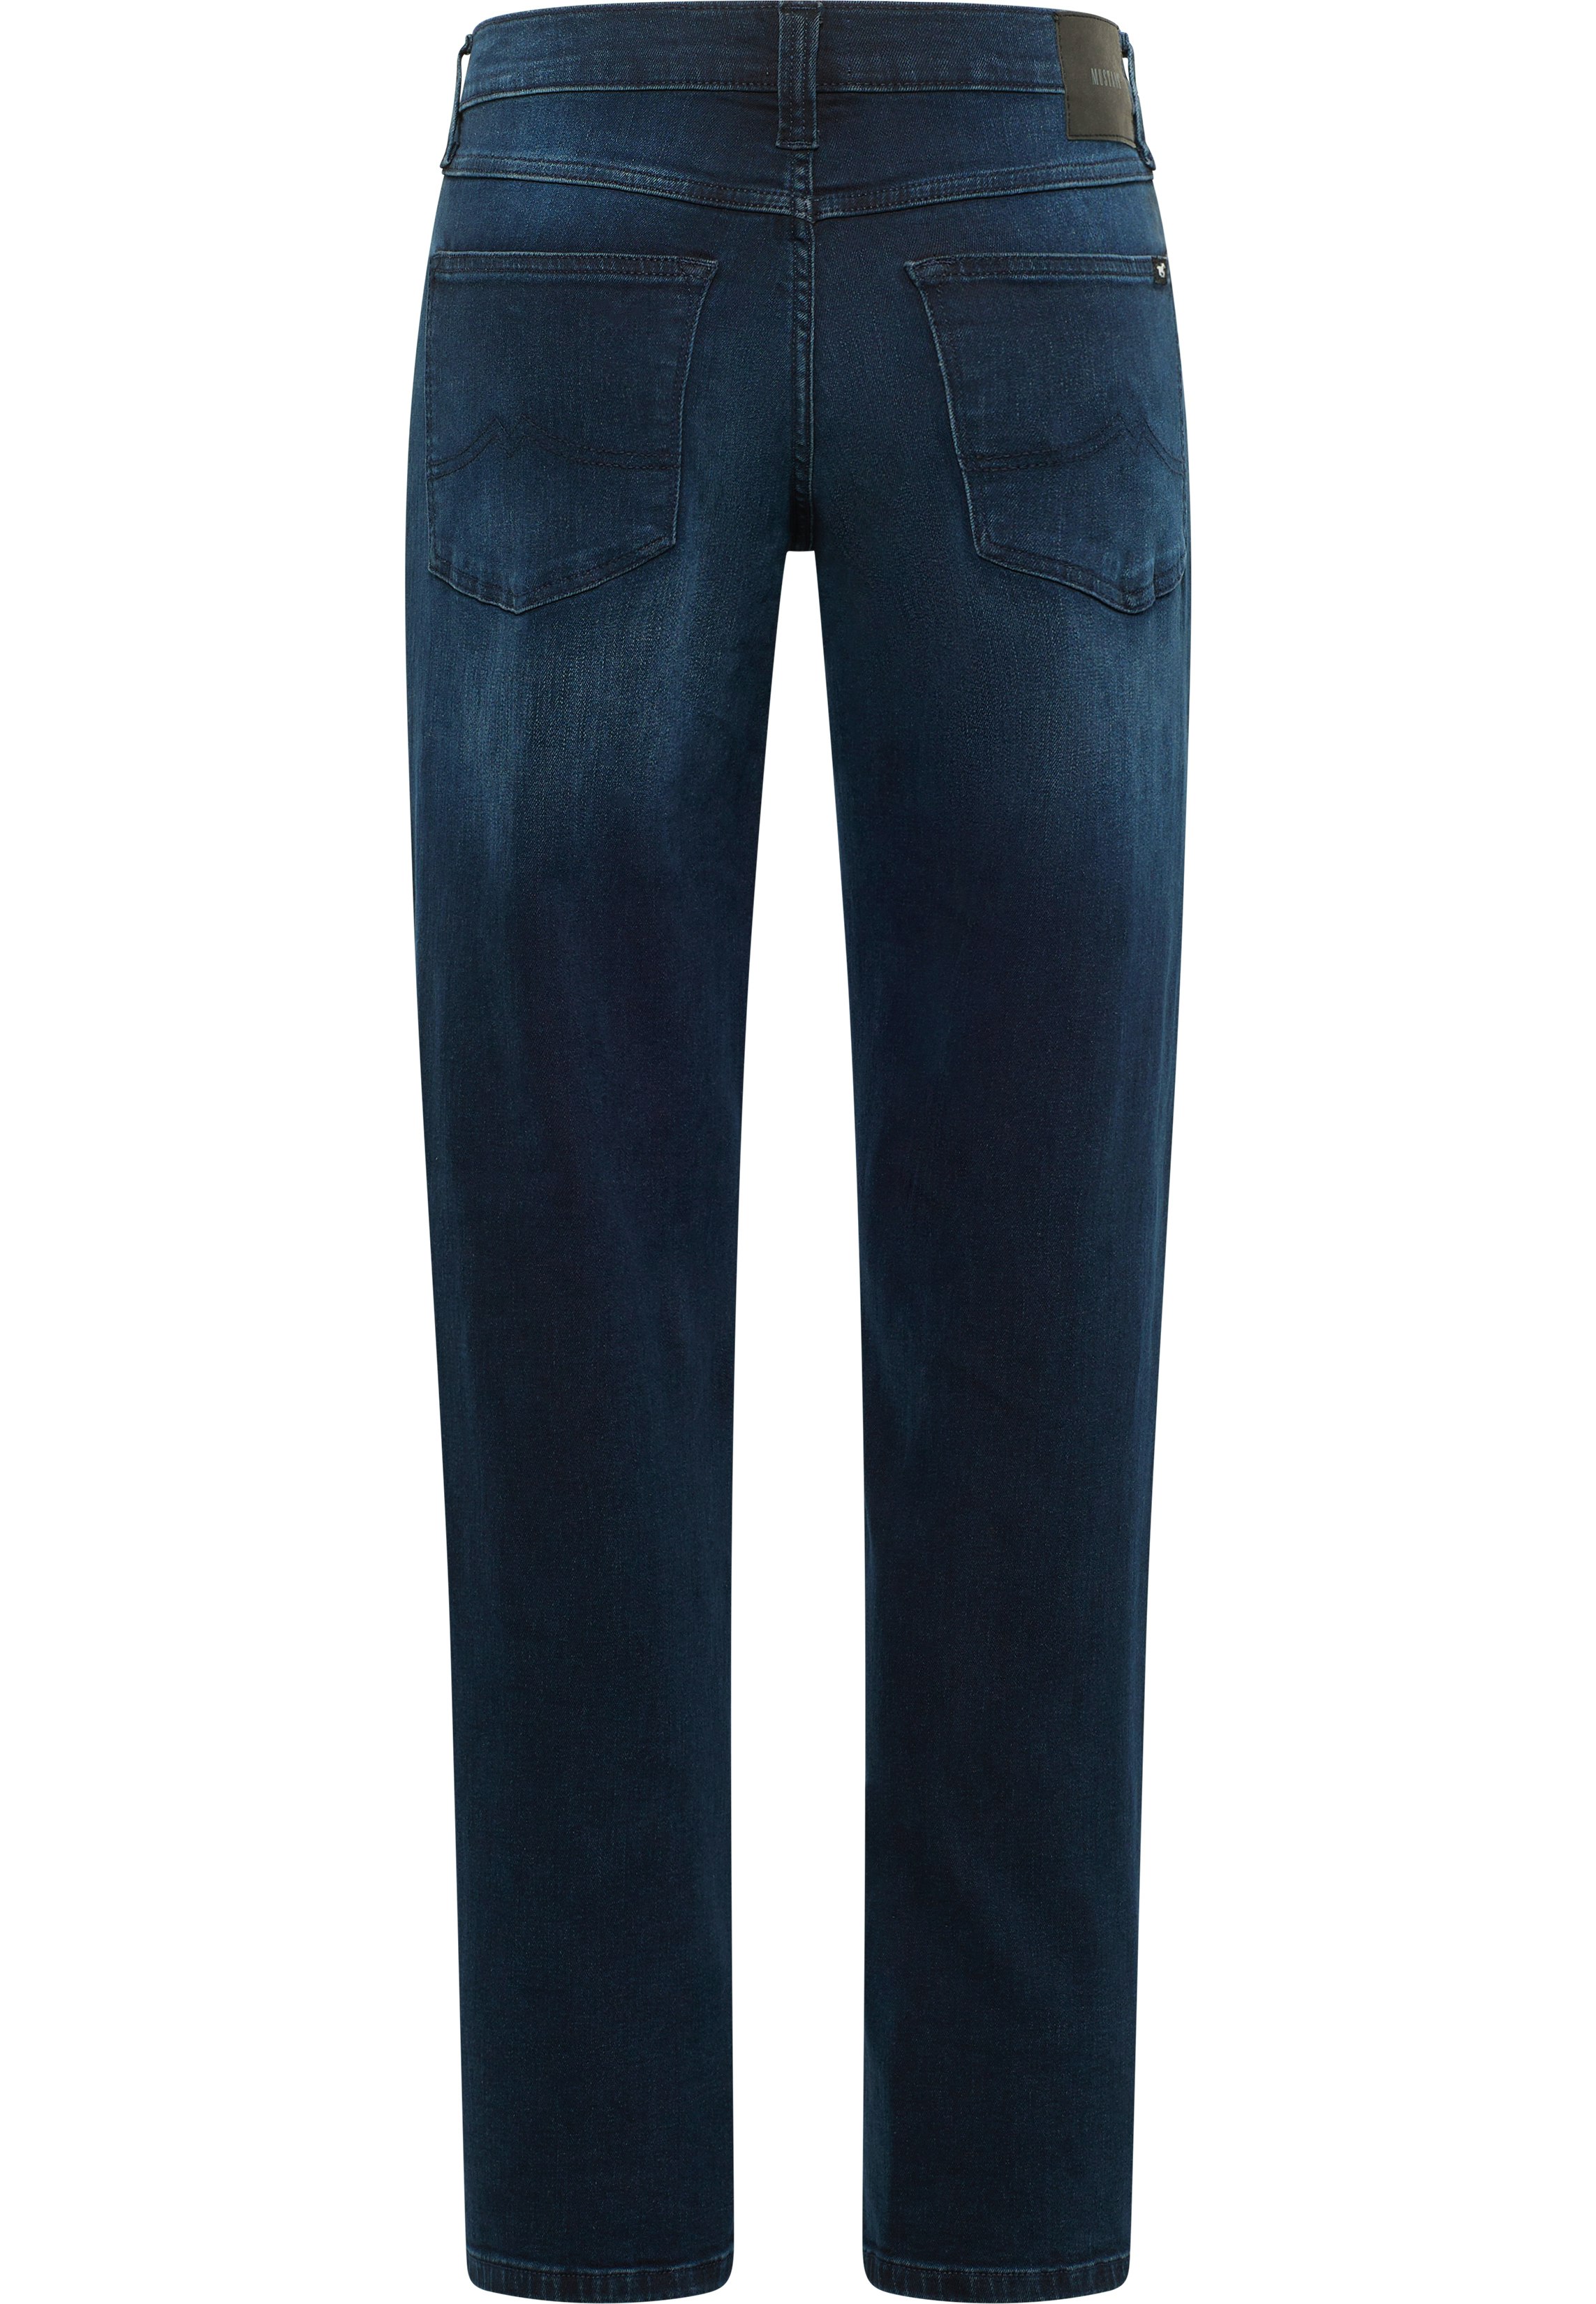 Mustang Jeans Big Sur Straight in deep blue used extra lang